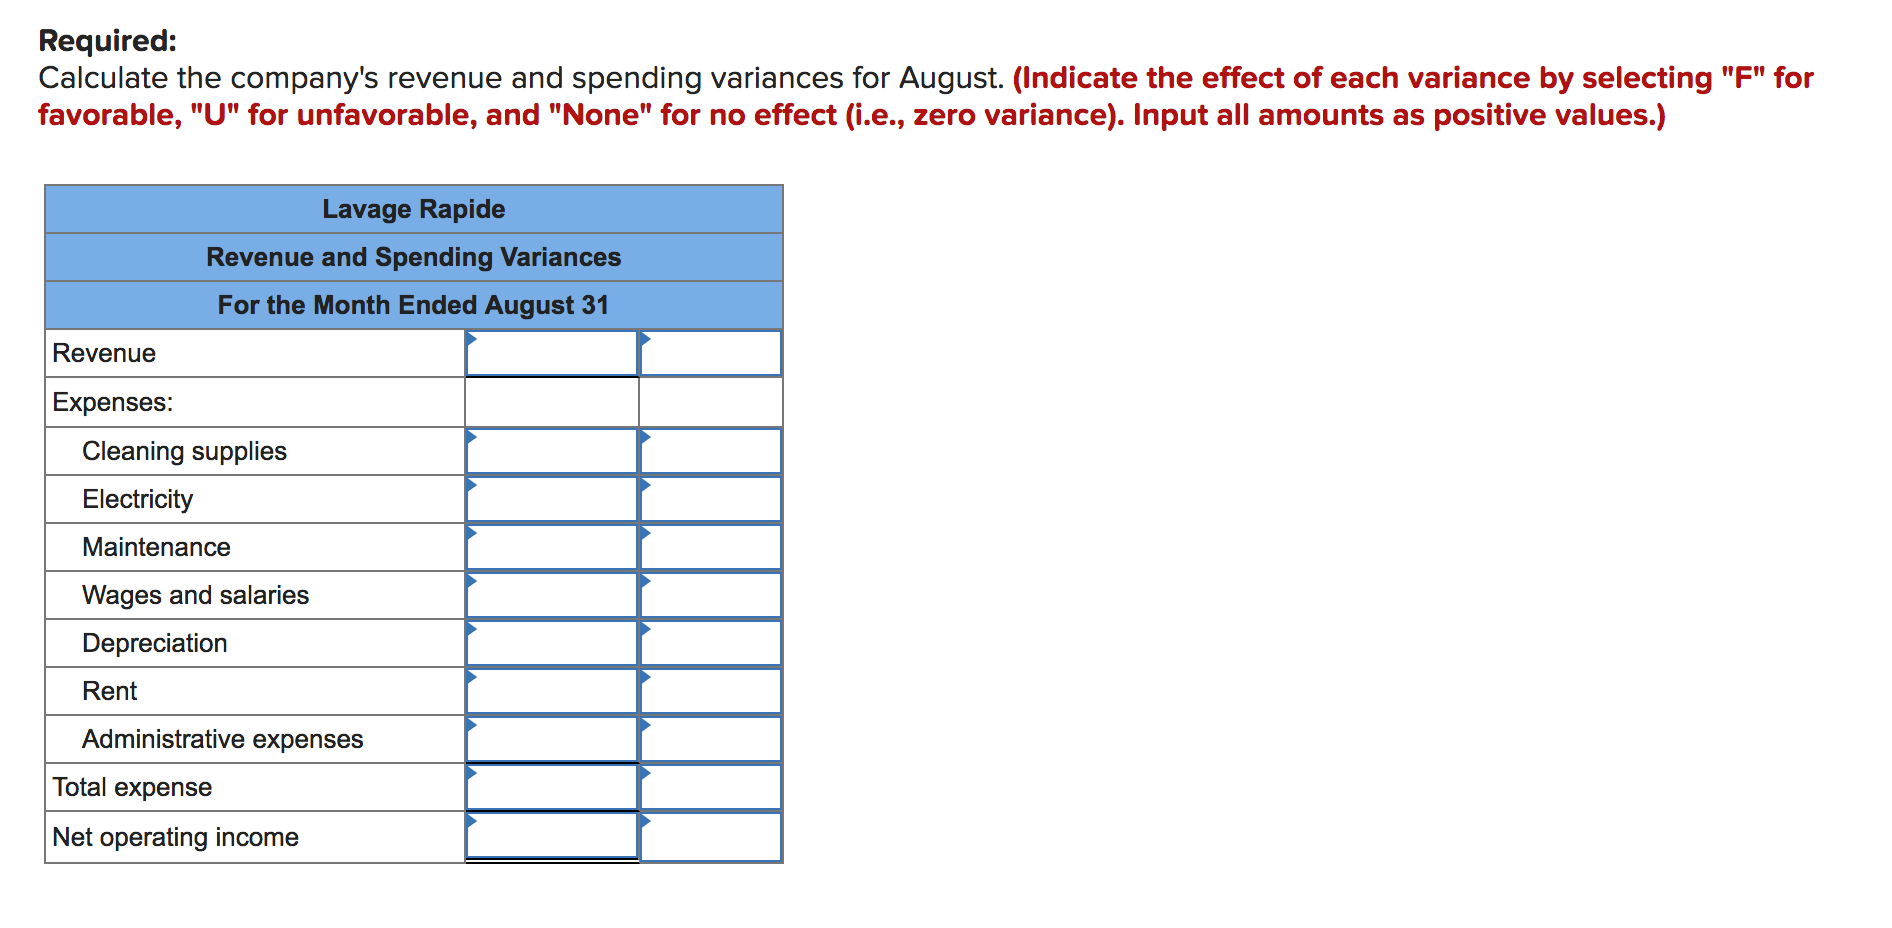 Required:
Calculate the company's revenue and spending variances for August. (Indicate the effect of each variance by selecting "F" for
favorable, "U" for unfavorable, and "None" for no effect (i.e., zero variance). Input all amounts as positive values.)
Lavage Rapide
Revenue and Spending Variances
For the Month Ended August 31
Revenue
Expenses:
Cleaning supplies
Electricity
Maintenance
Wages and salaries
Depreciation
Rent
Administrative expenses
Total expense
Net operating income
